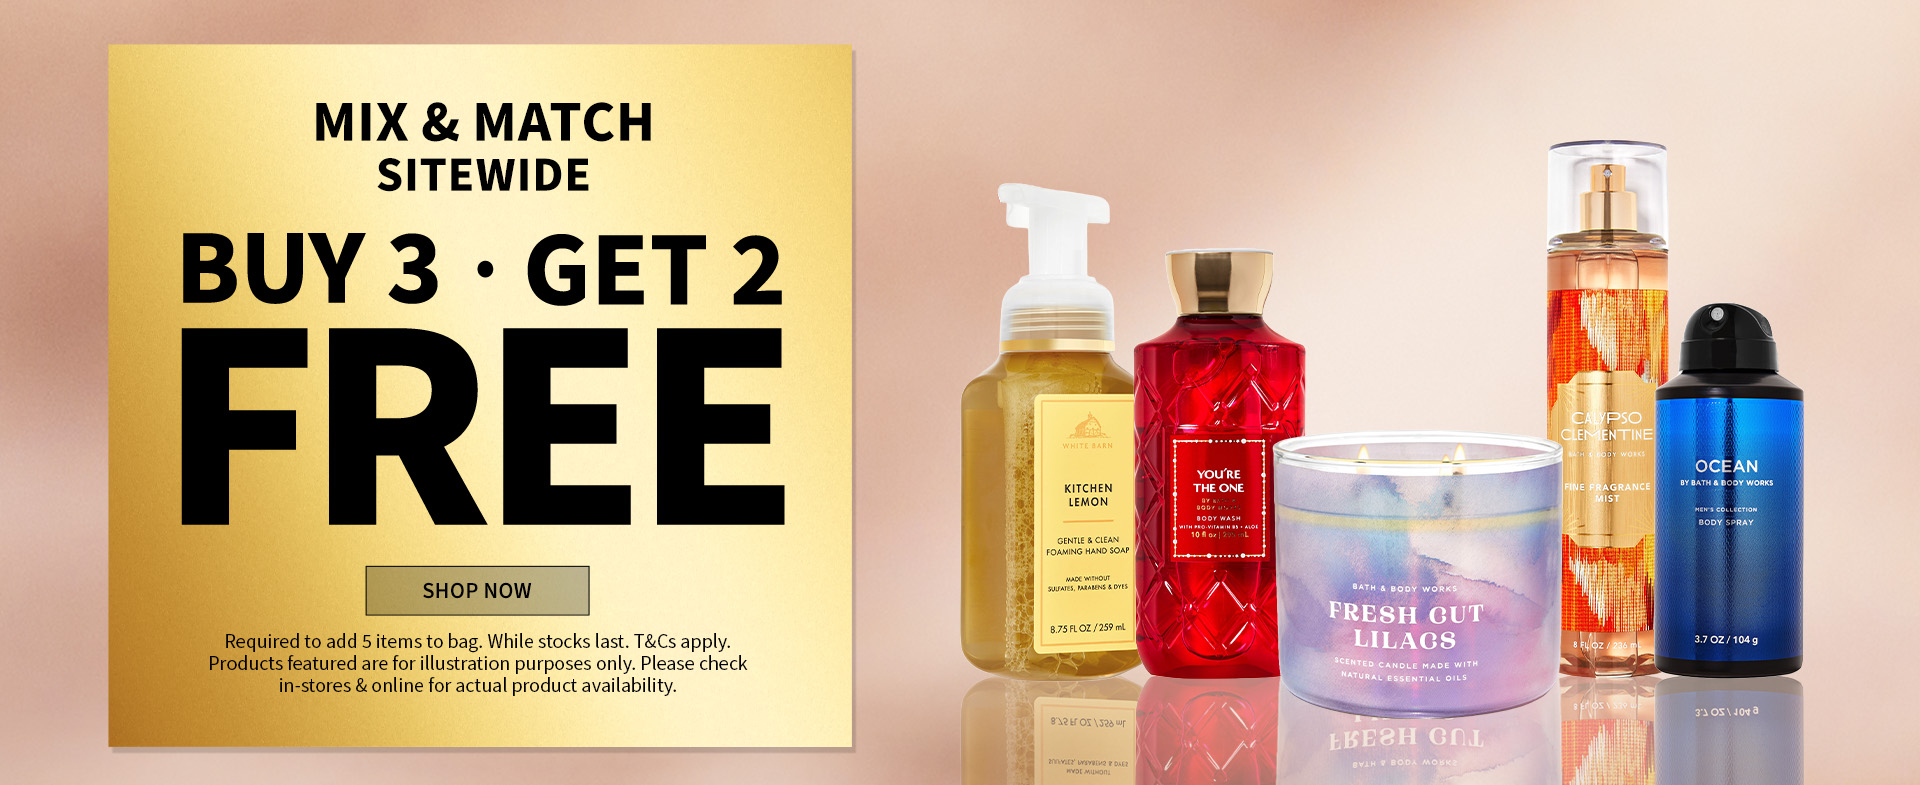 MIX & MATCH SITEWIDE BUY 3, GET 2 FREE